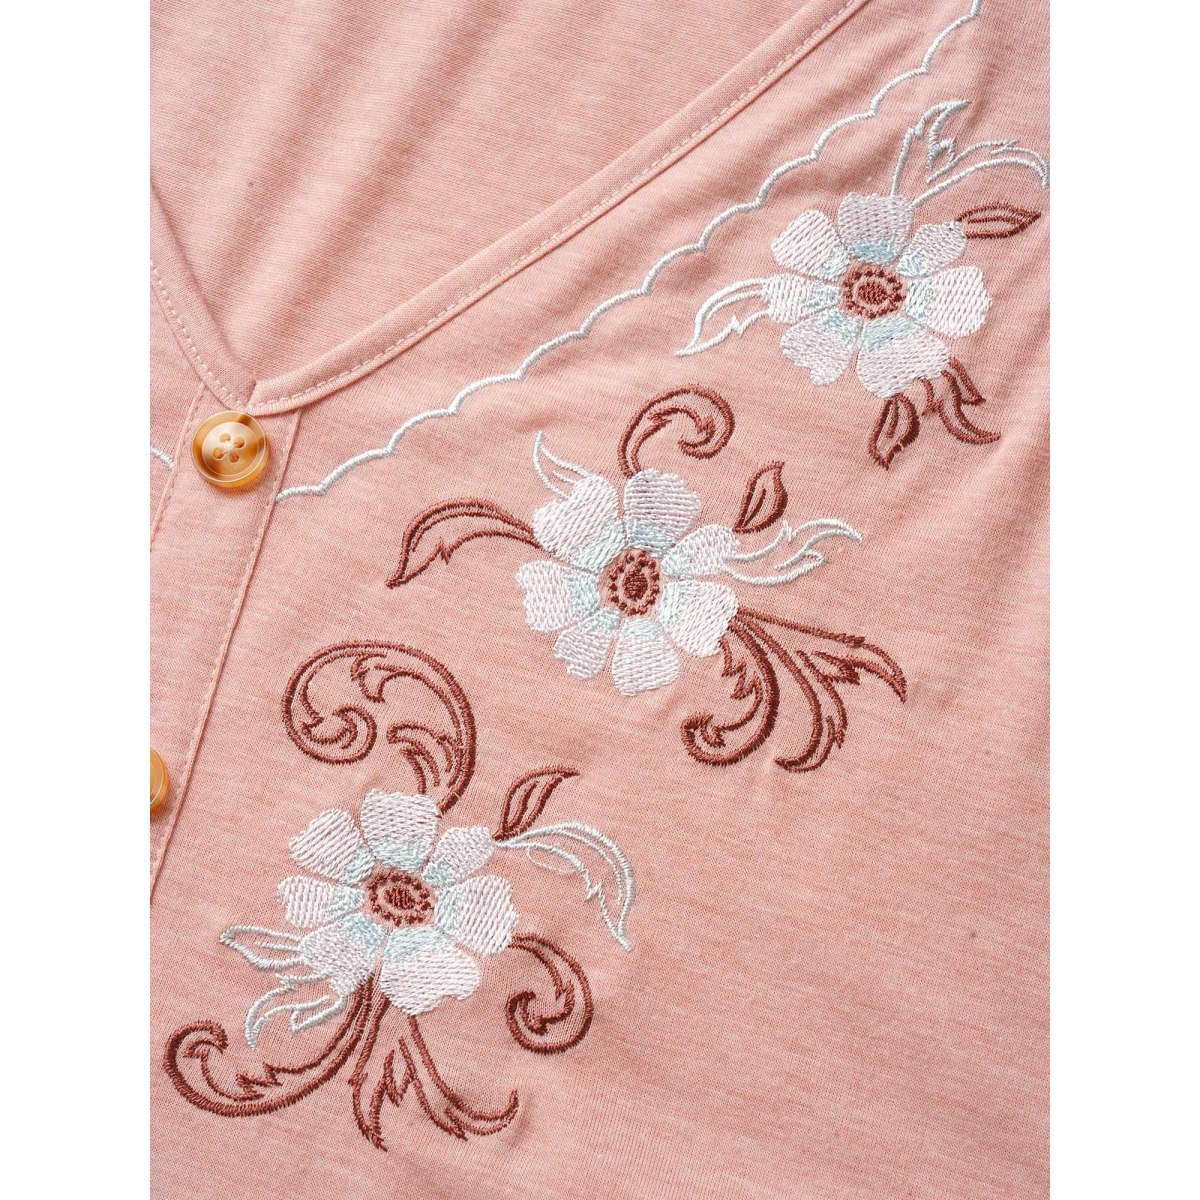 

Plus Size Floral Embroidered Button Detail Tank Top Women MistyRose Resort Embroidered V-neck Vacation Tank Tops Camis BloomChic